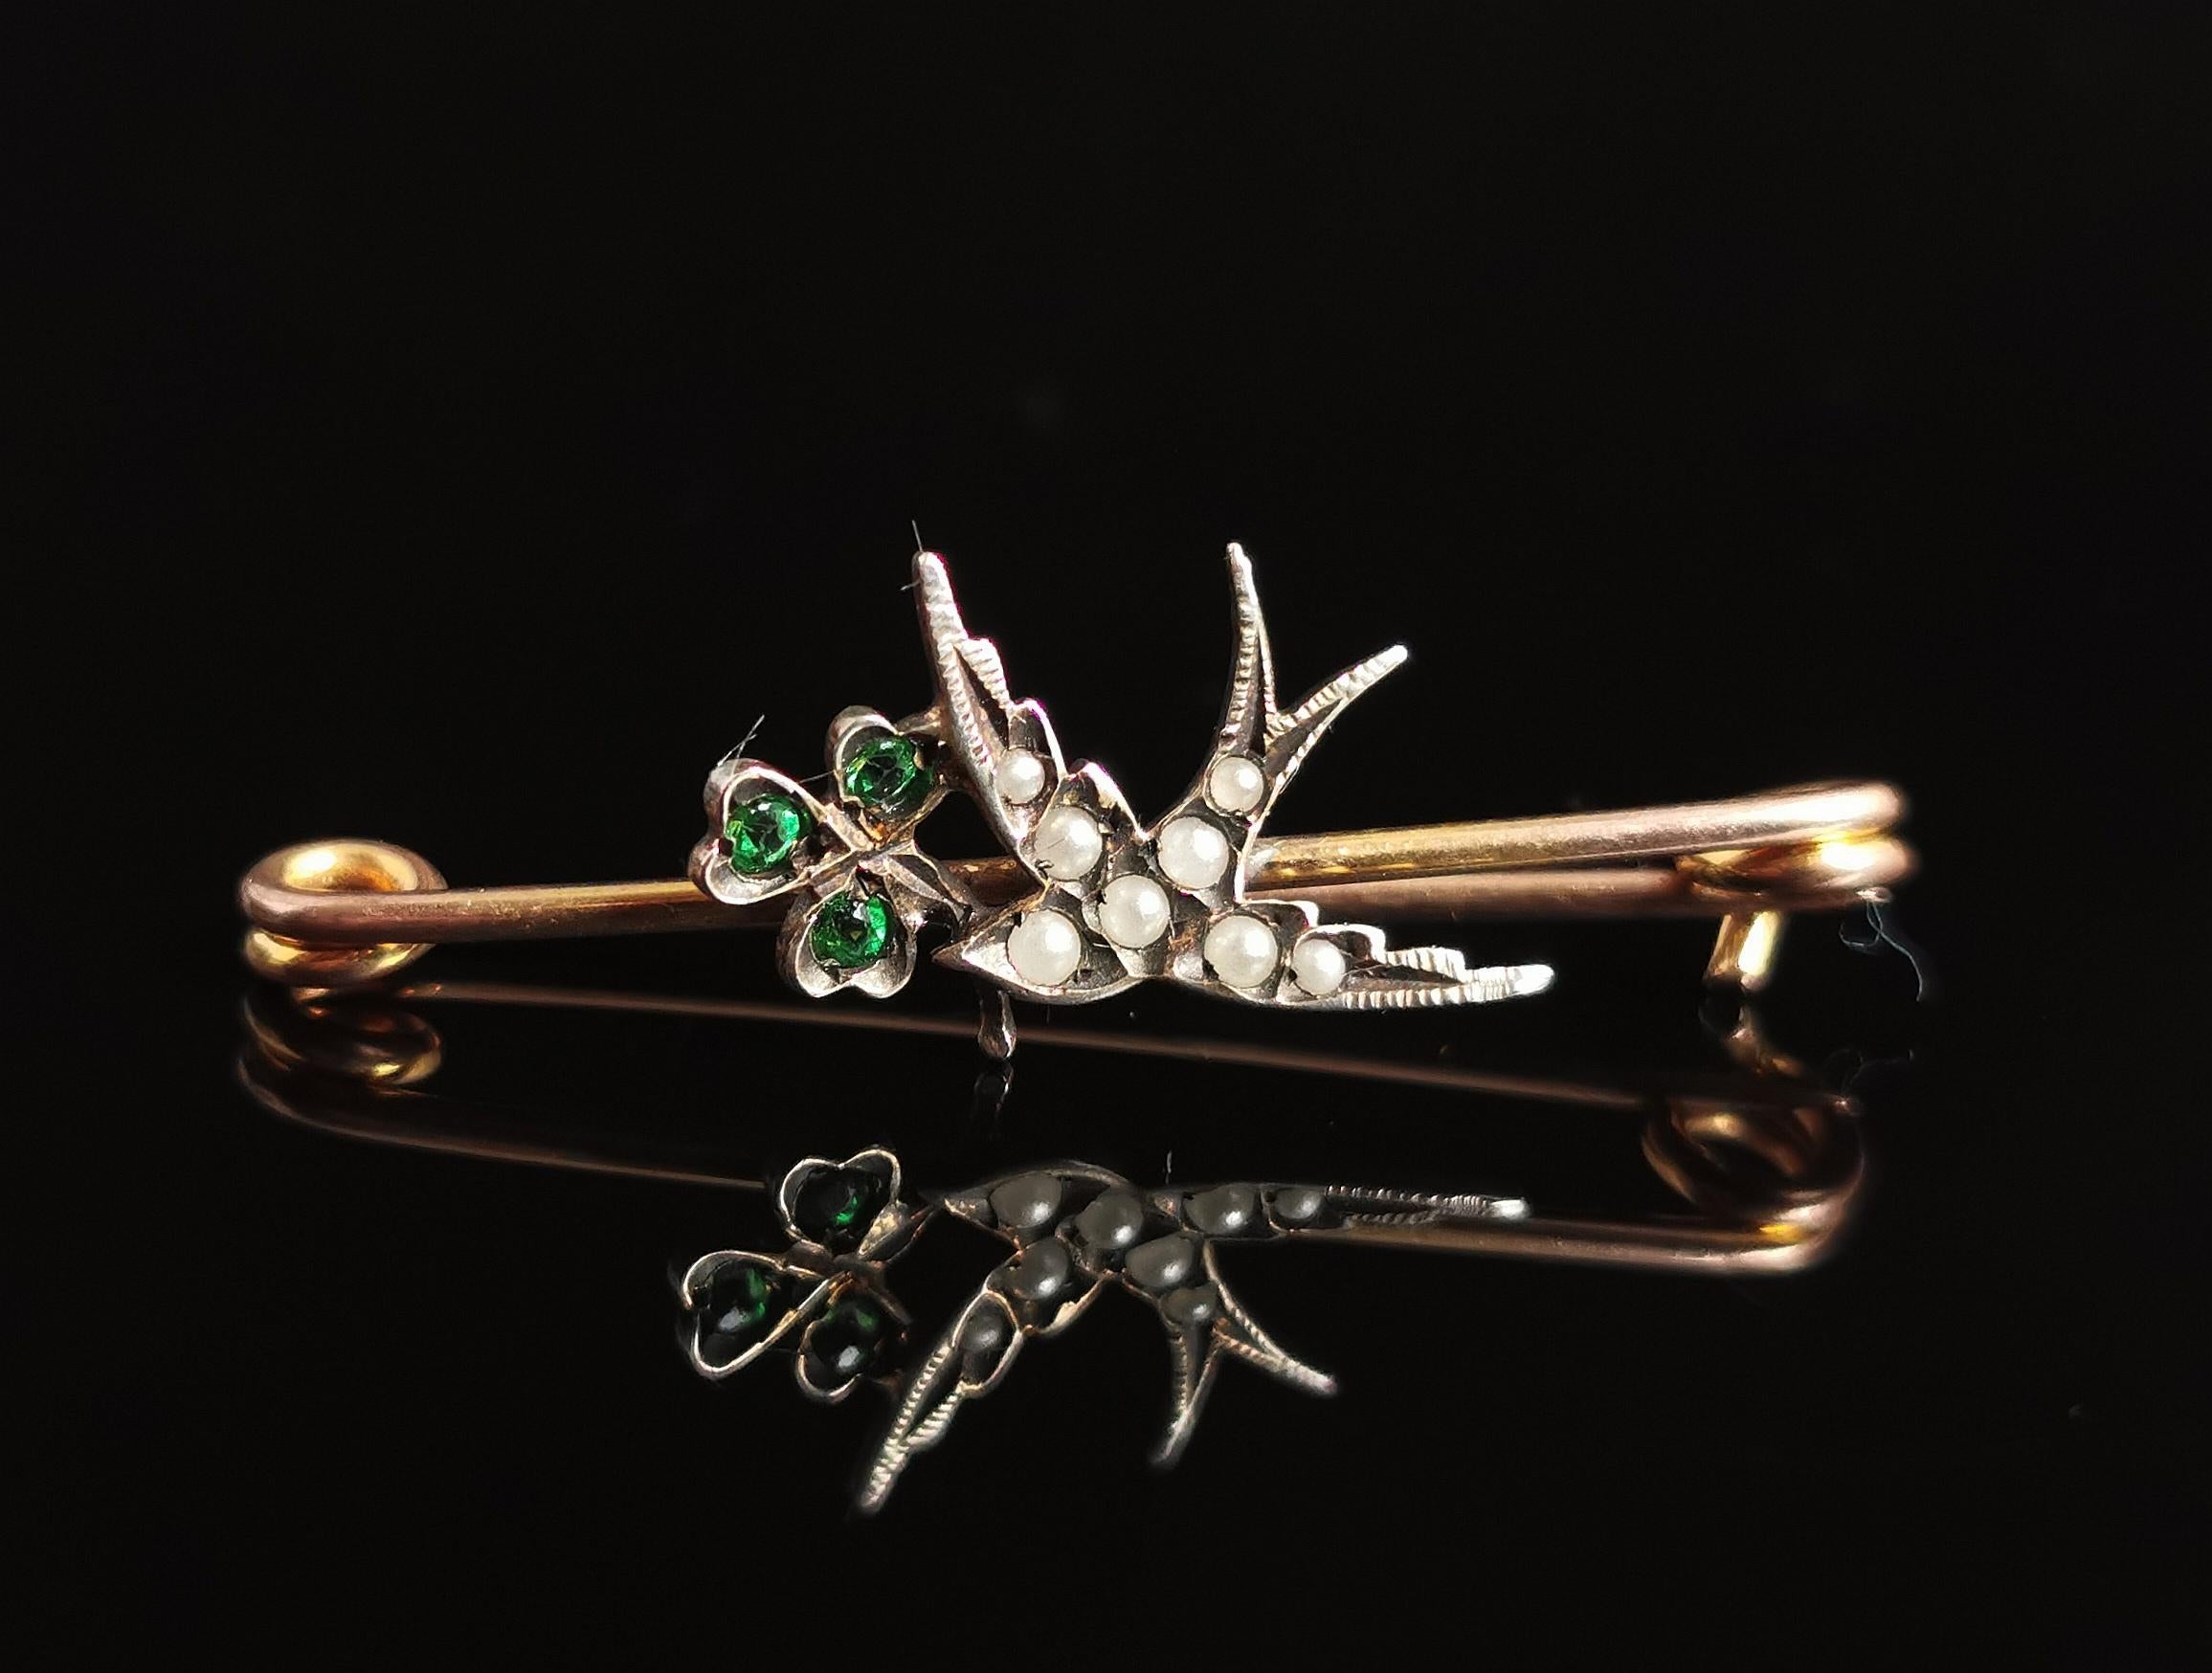 A beautiful antique Edwardian era Swallow and Shamrock or clover brooch.

It is a small dainty piece, very delicate but big on symbolism.

The brooch has an 18kt rolled gold pin mount with a sterling silver Swallow in flight carrying a lucky